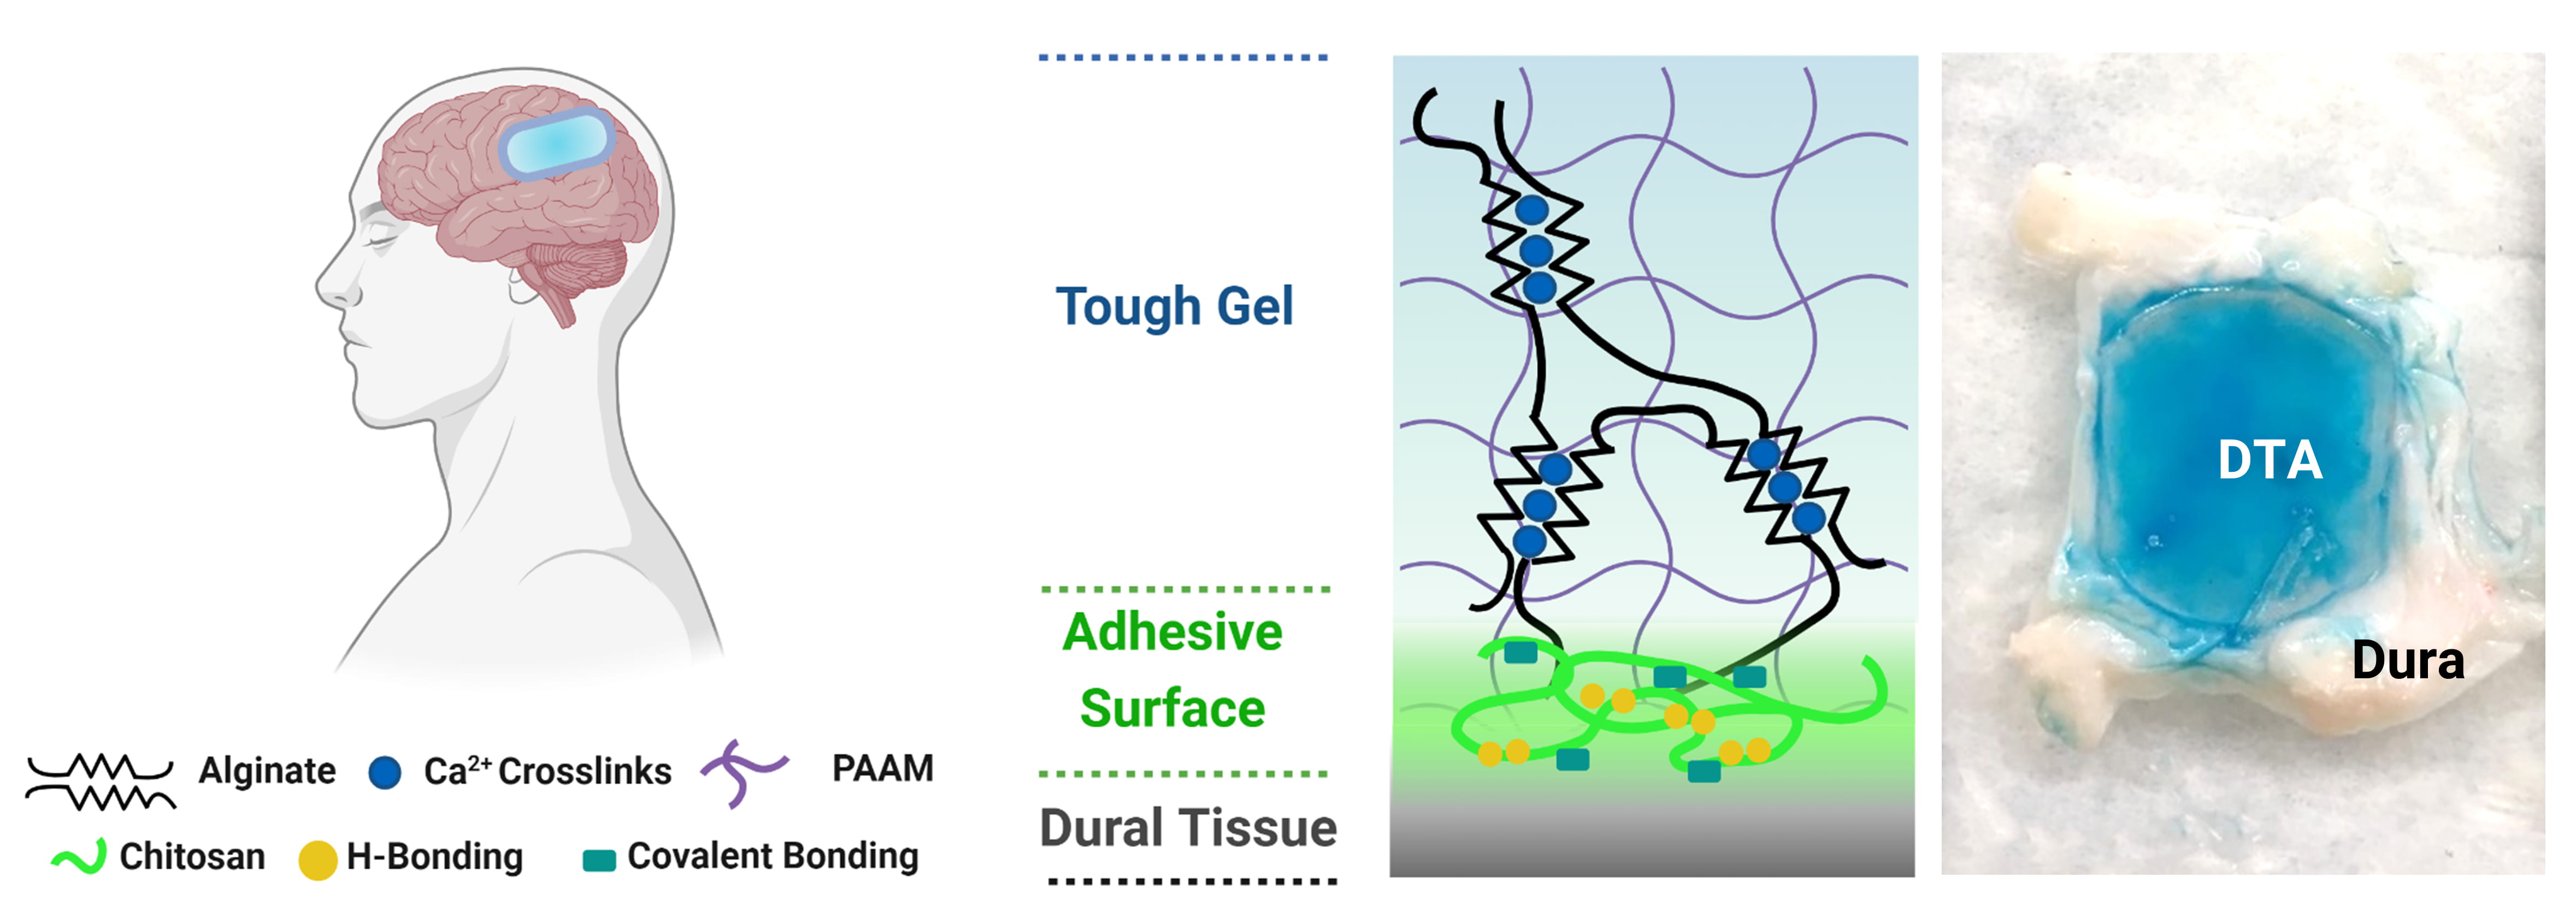 The Dural Tough Adhesive (DTA) consists of two intermixed polymer networks: a polyacrylamide network that is permanently crosslinked and provides high elasticity, and an alginate that is reversibly crosslinked and can redistribute the energy produced by mechanical forces in underlying tissues. Adding a highly adhesive layer to this Tough Gel that uses chitosan, a fibrous, sugar-based substance derived from the outer skeletons of shellfish, enables DTA to form multiple chemical interactions with tissues like the dura that create a tight seal. Credit: Wyss Institute at Harvard University